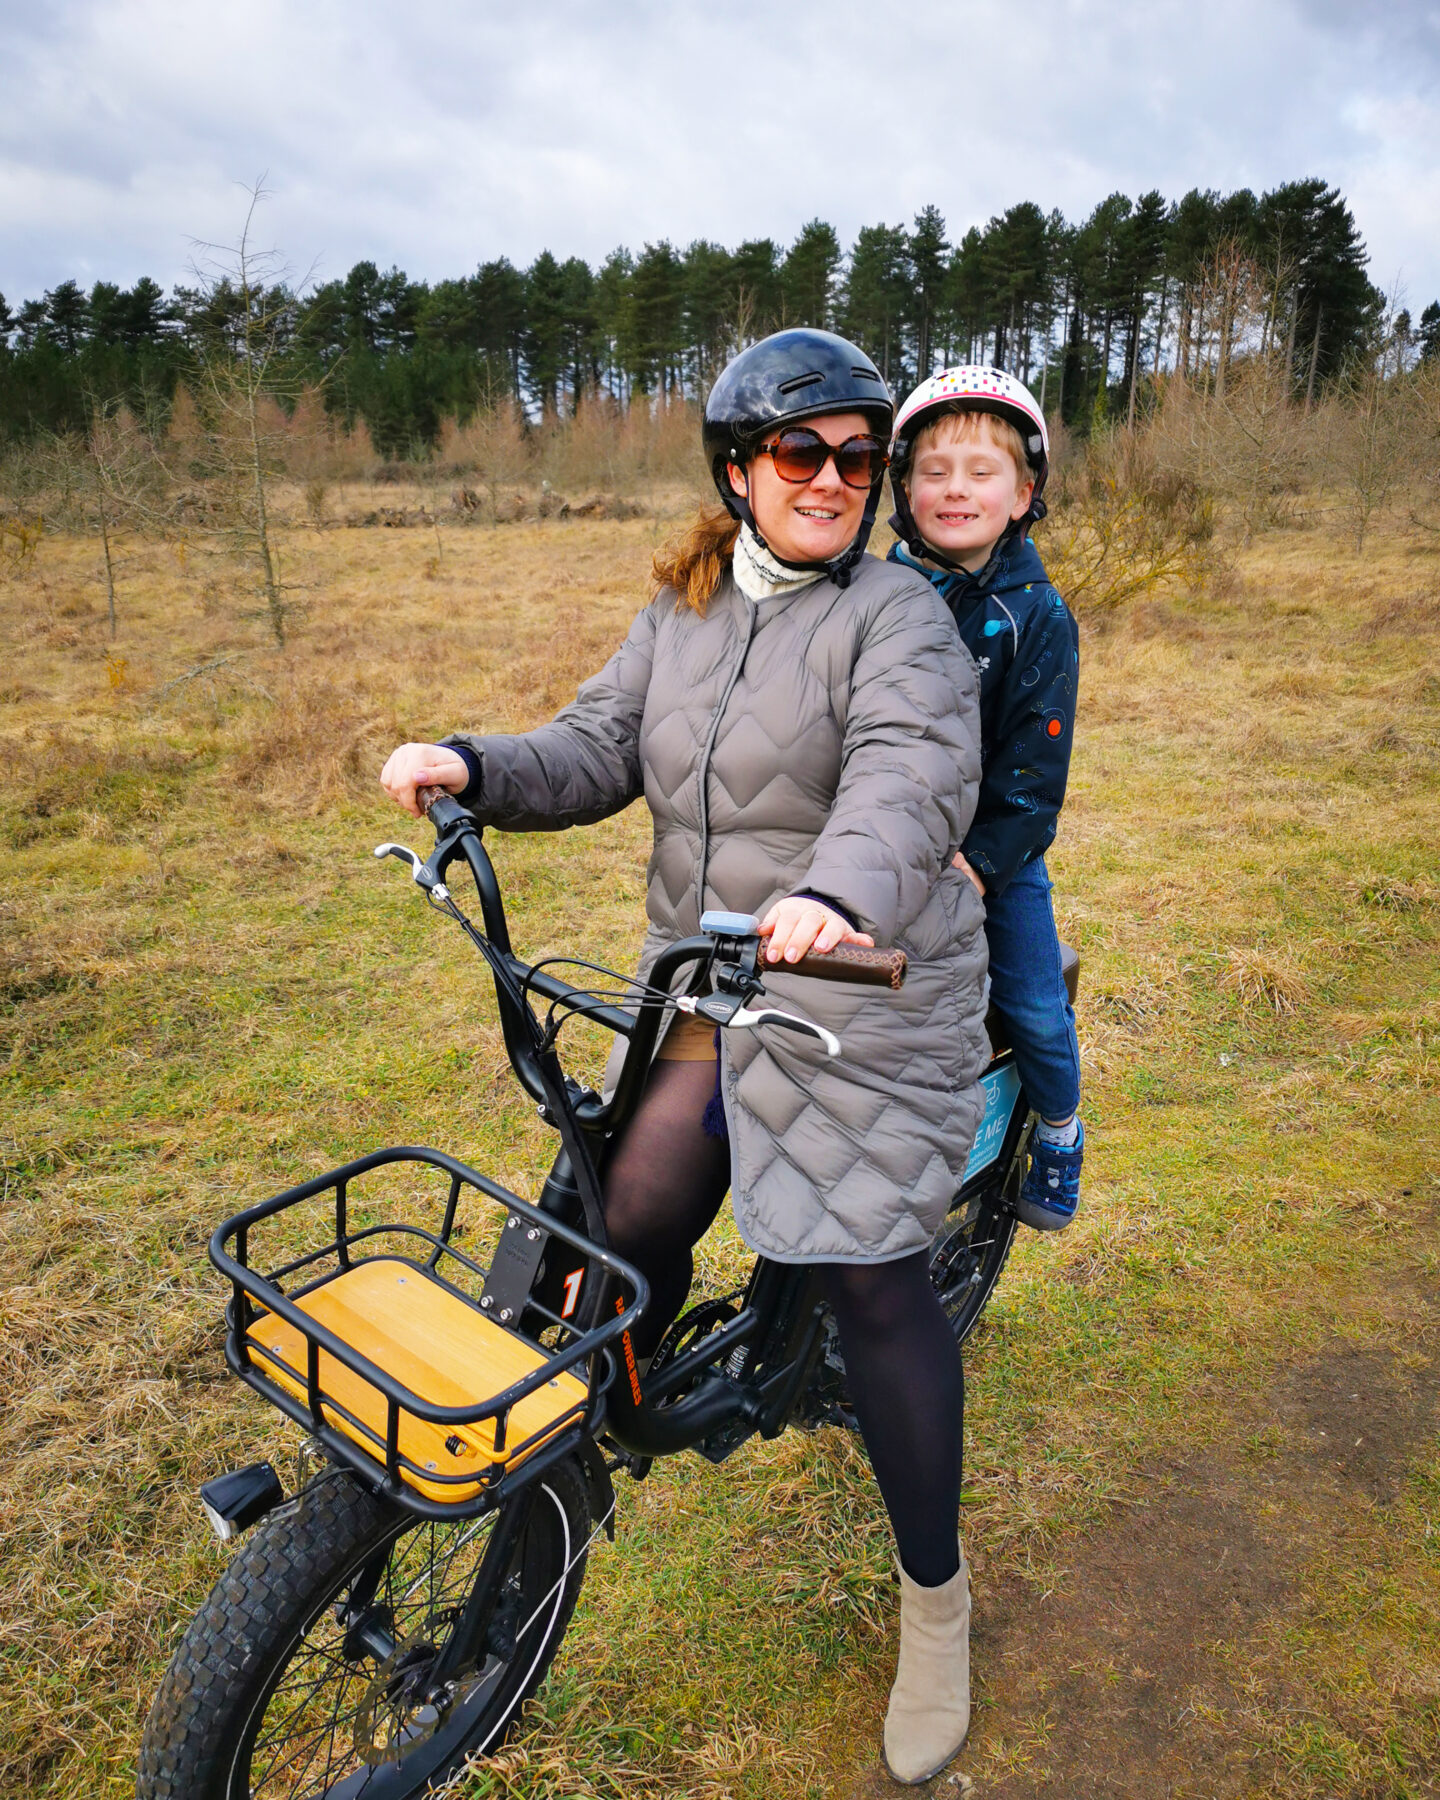 Bury St Edmunds, Visit Suffolk, Half-term, Family Fun, Visit England, East Anglia, Family Trip, Family Visit, Family-Friendly, the Frenchie Mummy, the Family Holiday, #burystedmundsandbeyond, West Stow Country Park, Eezybike